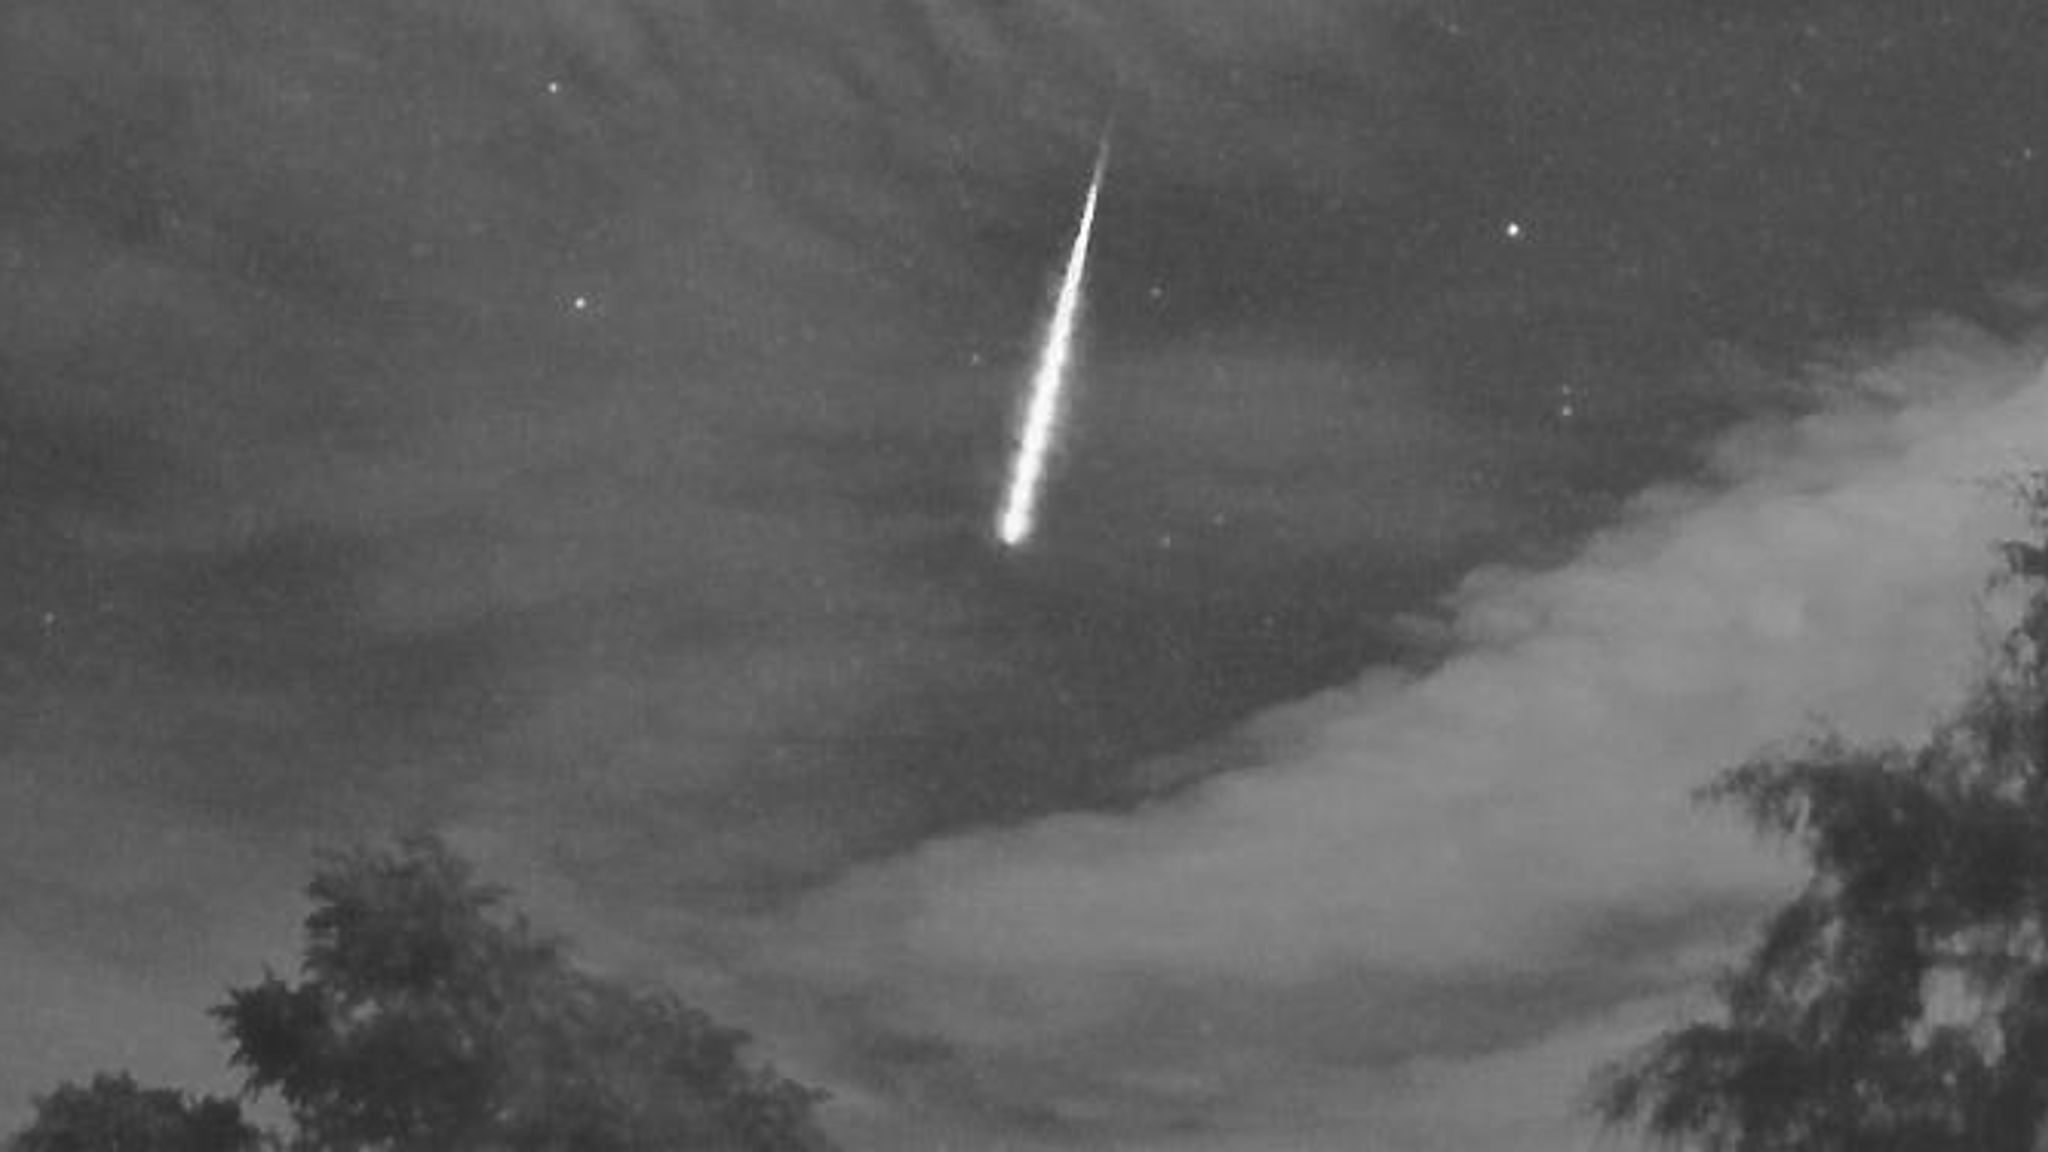 Brilliant fireball' that lit up the night sky over parts of Britain was space debris, experts say | UK News | Sky News